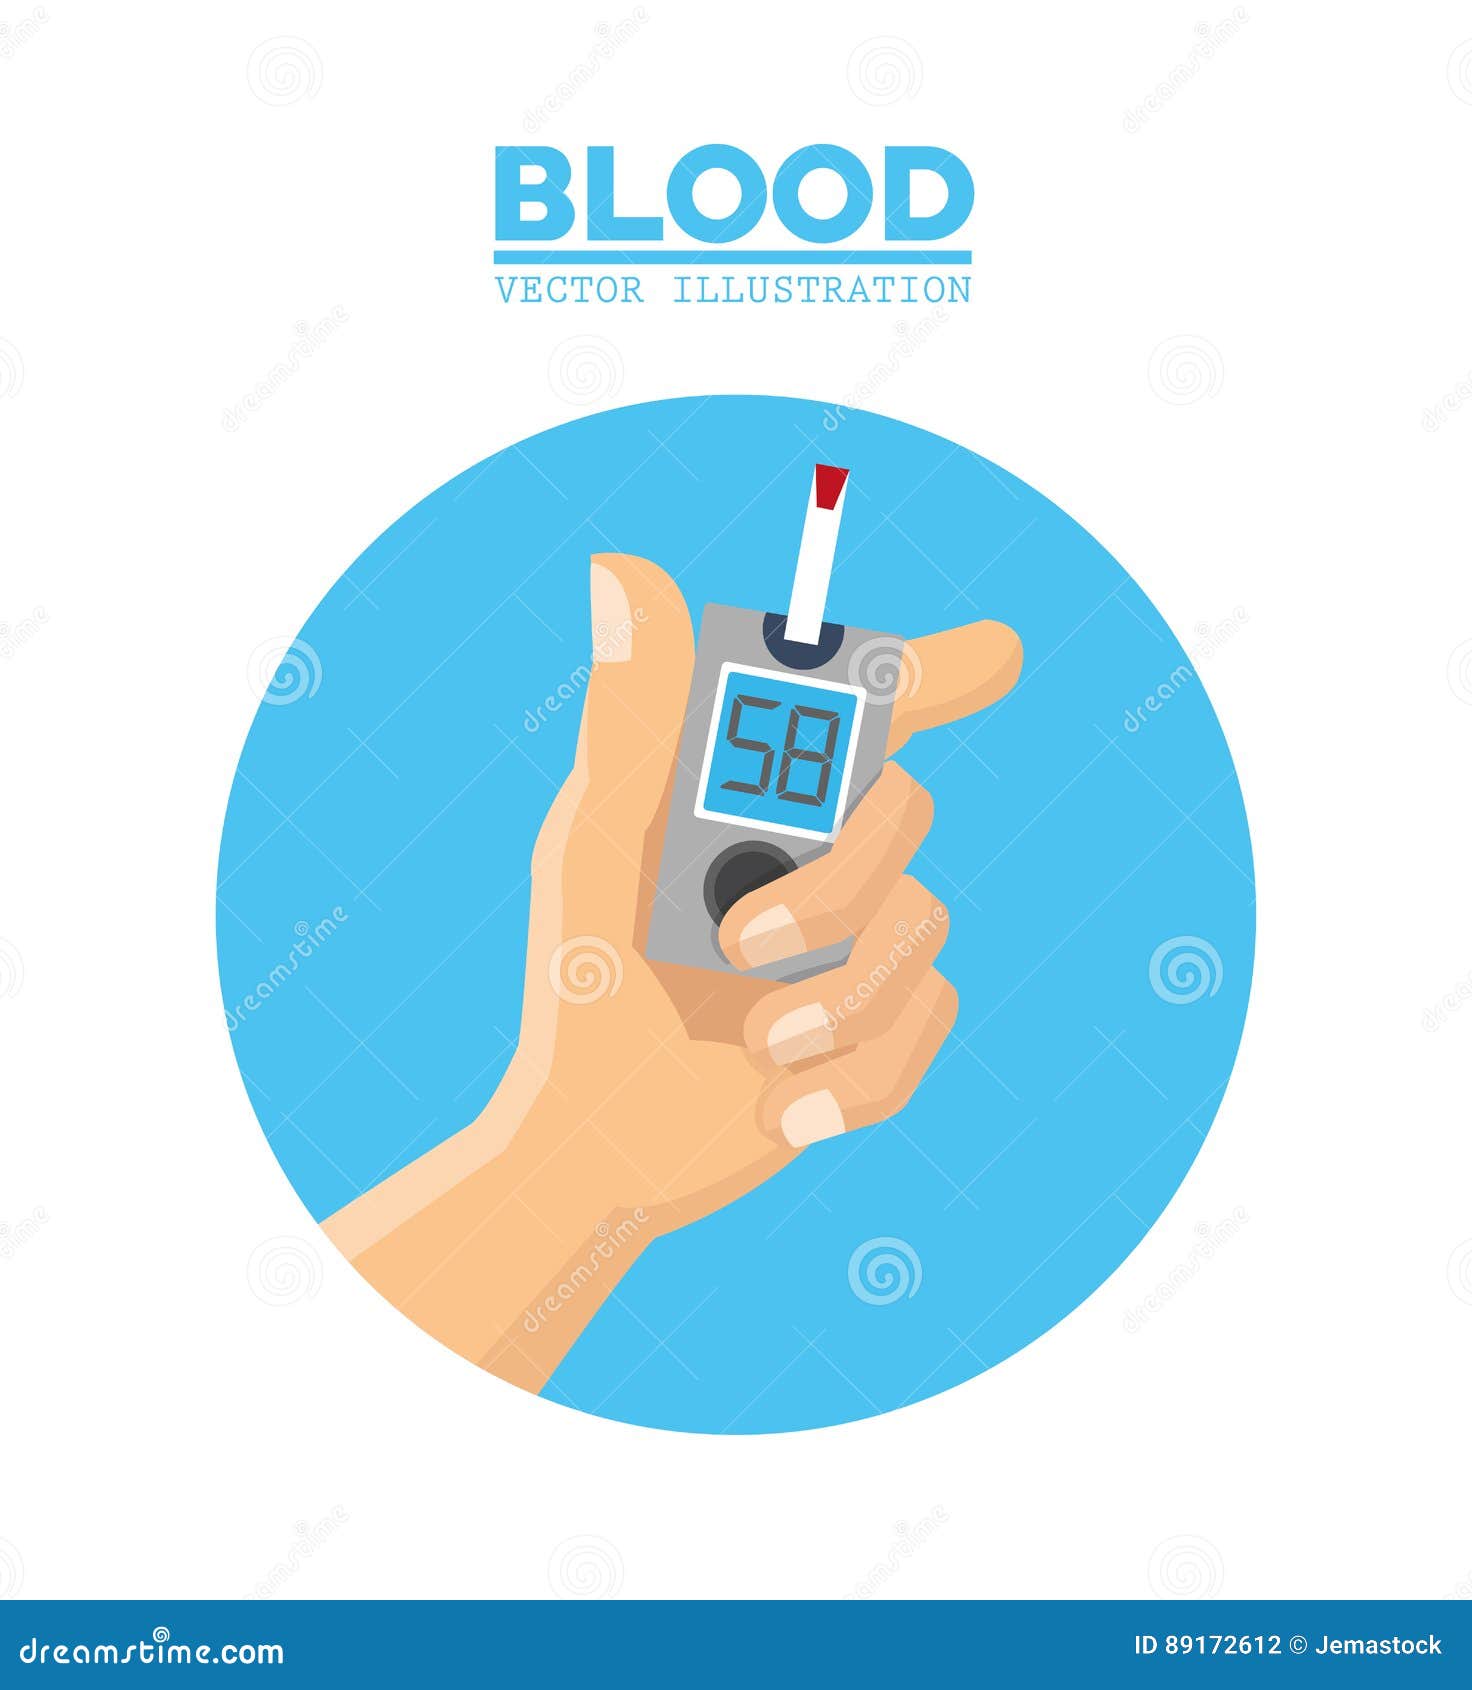 clipart blood glucose monitor - photo #50